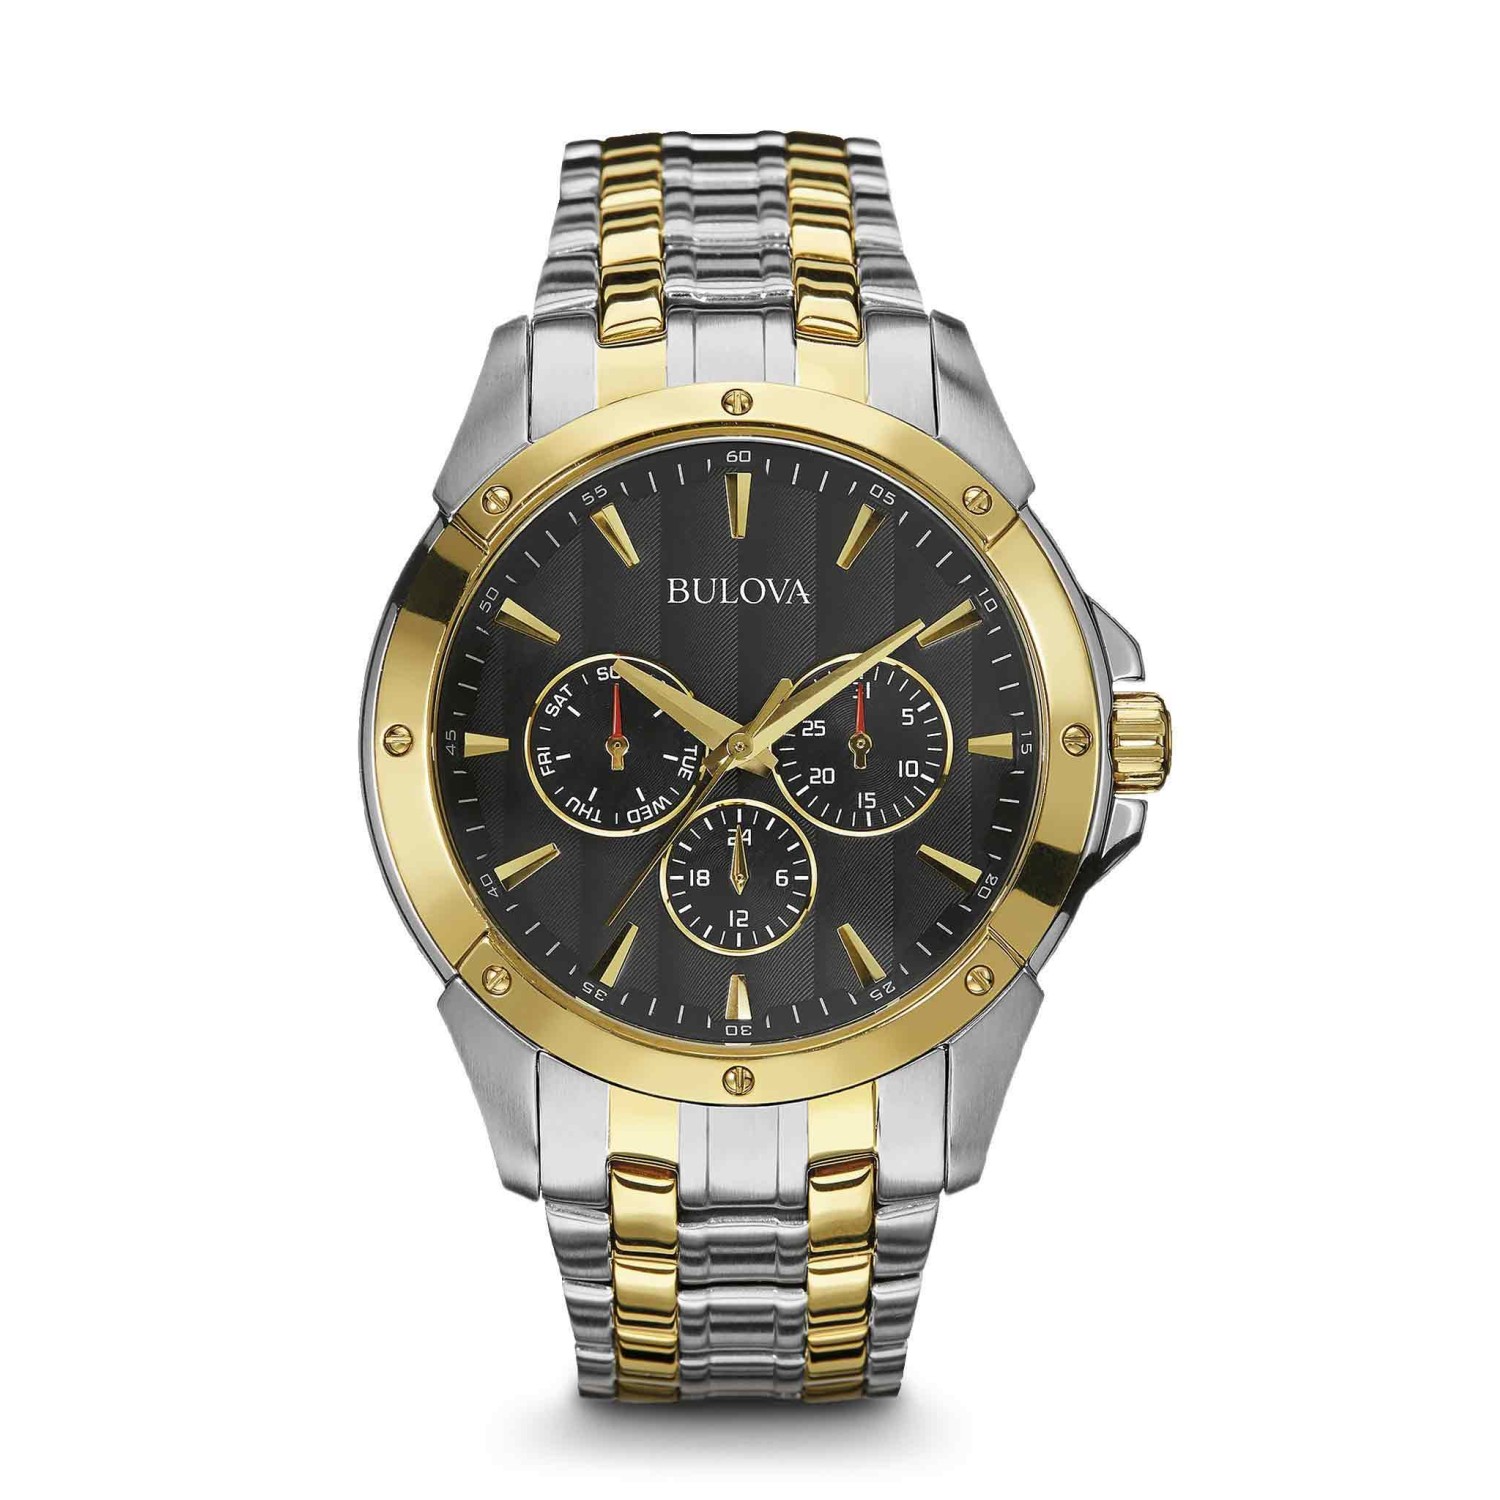 98C120 Bulova Mens Watch. From the Classic Collection. Multifunction design in stainless steel with two-tone gold and silver ion-plated finish, patterned black dial, day, date and 24-hour sub-dials, screw-back case, and double-press fold-over cla @christi